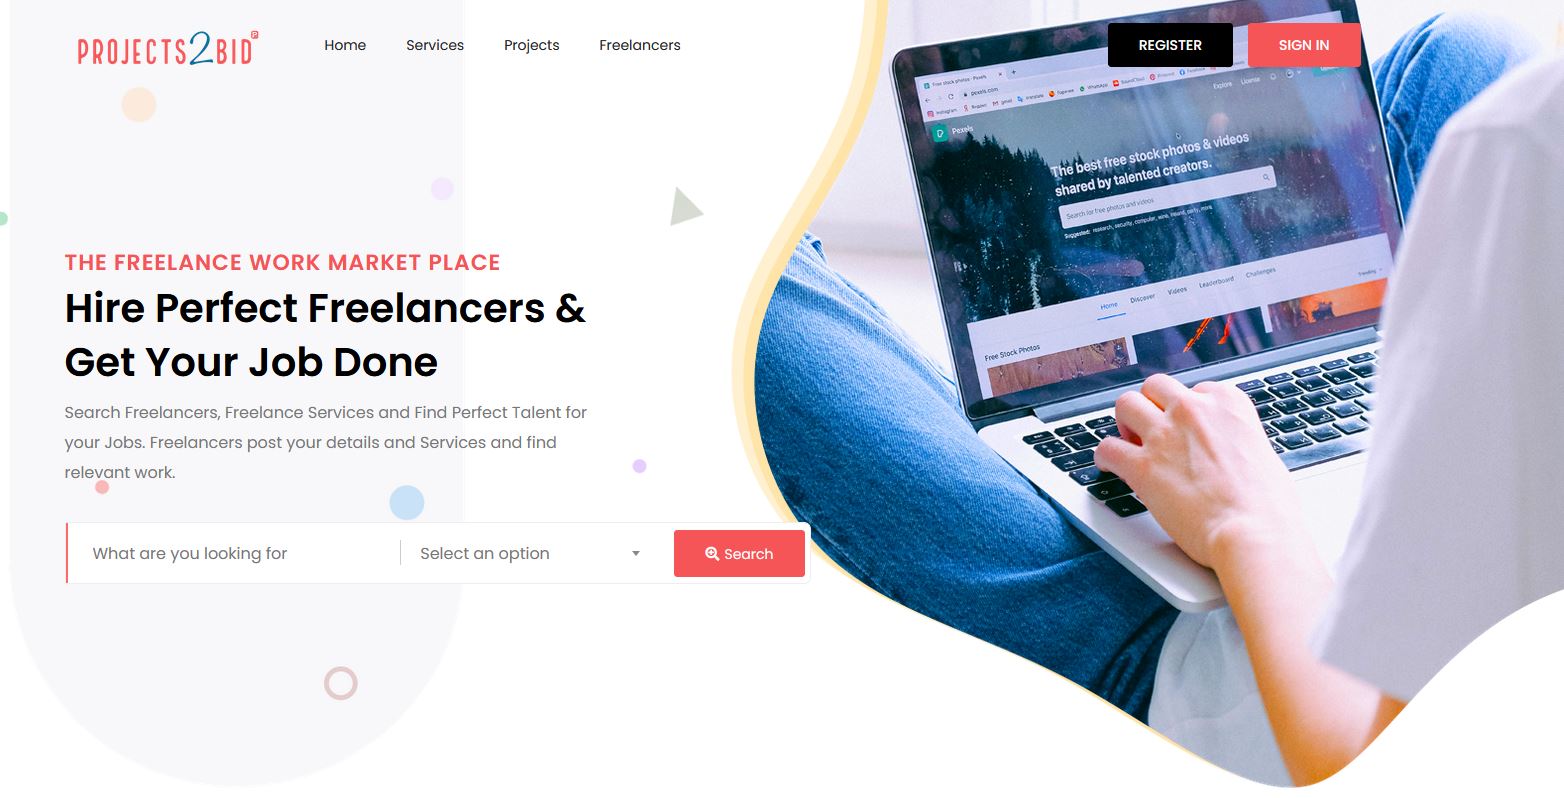 Hire Perfect Freelancers & Get Your Job Done